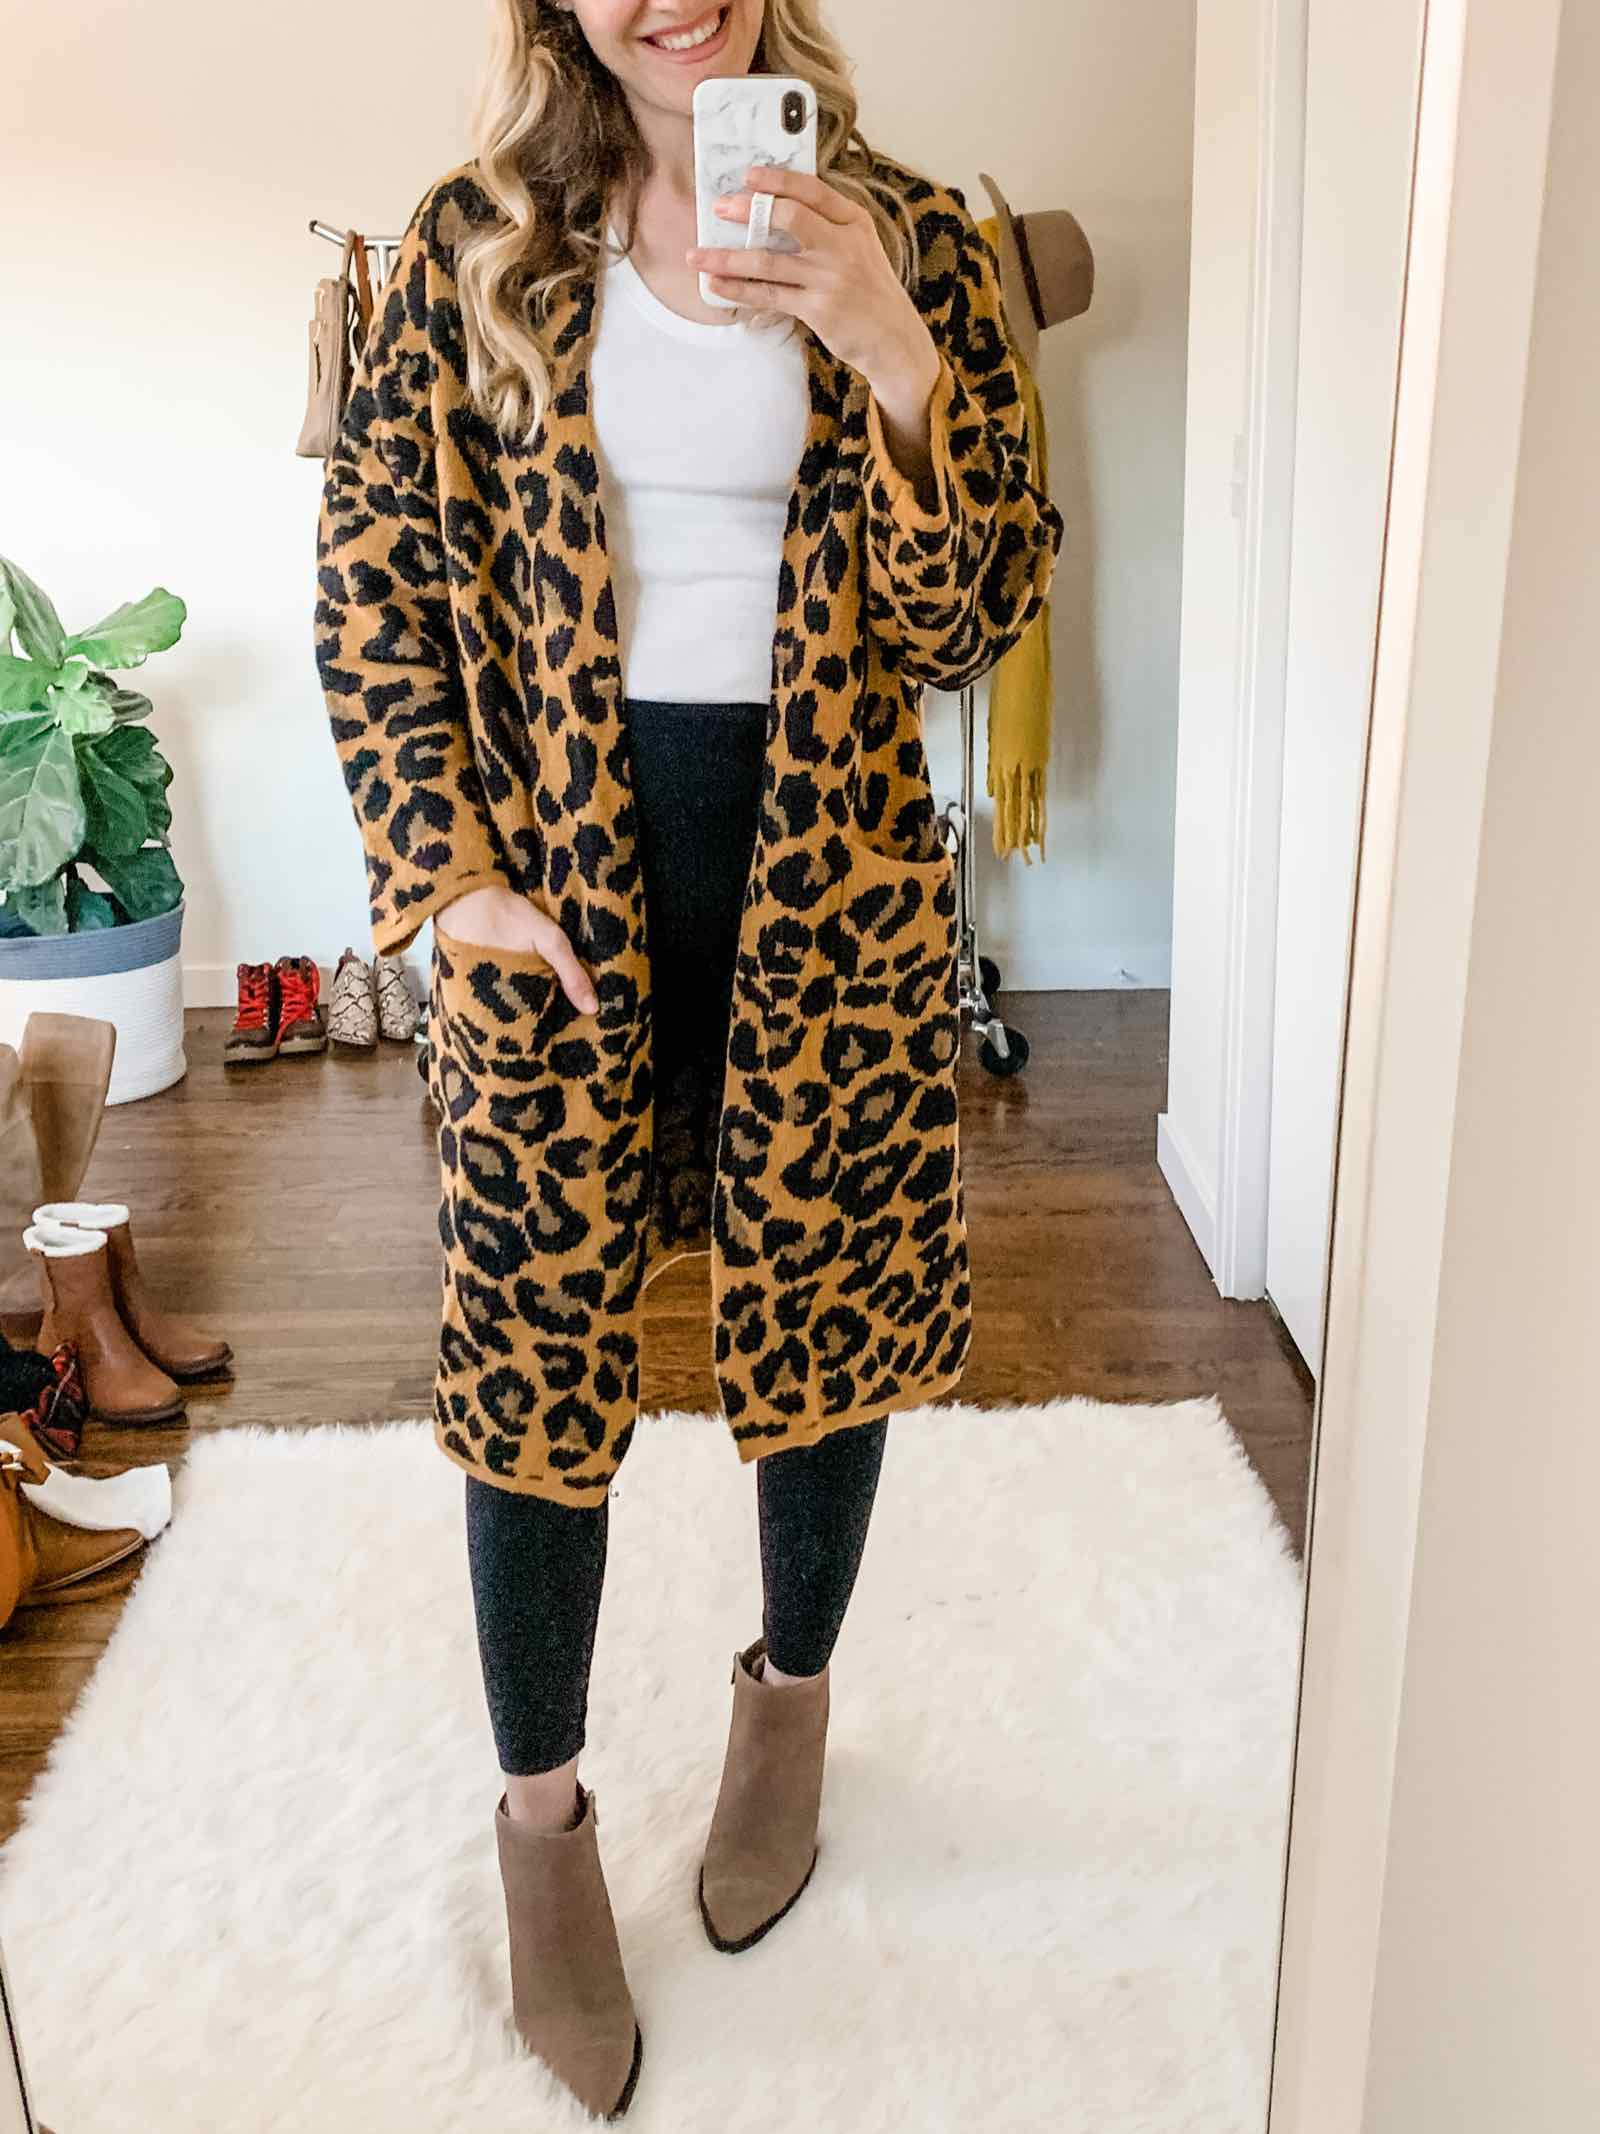 The coziest leopard print cardigan only $16.99 at Walmart!